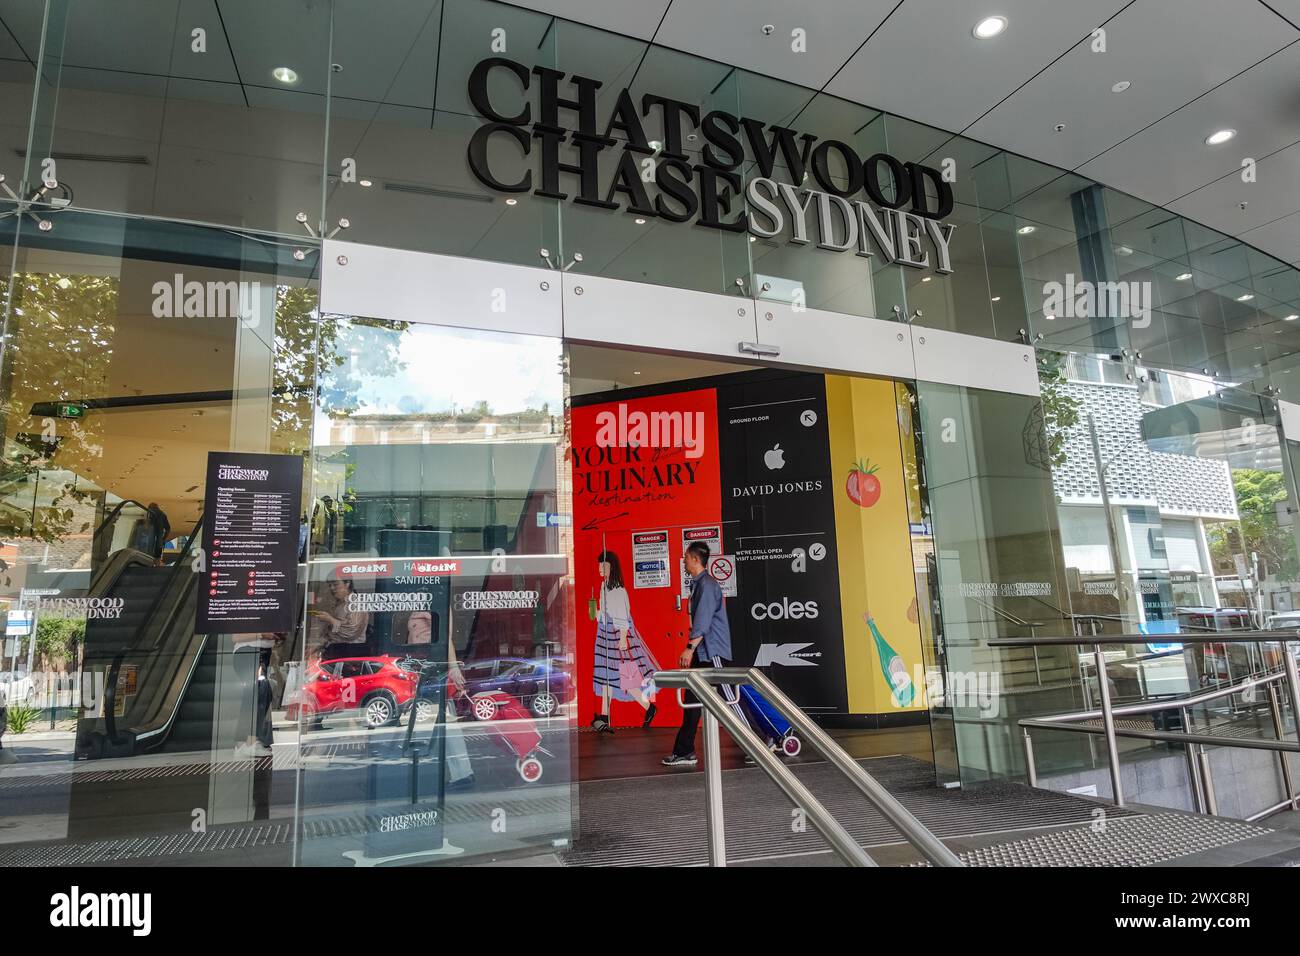 Chatswood Chase Sydney is a shopping centre in the suburb of Chatswood on the Lower North Shore of Sydney, New South Wales, Australia Stock Photo